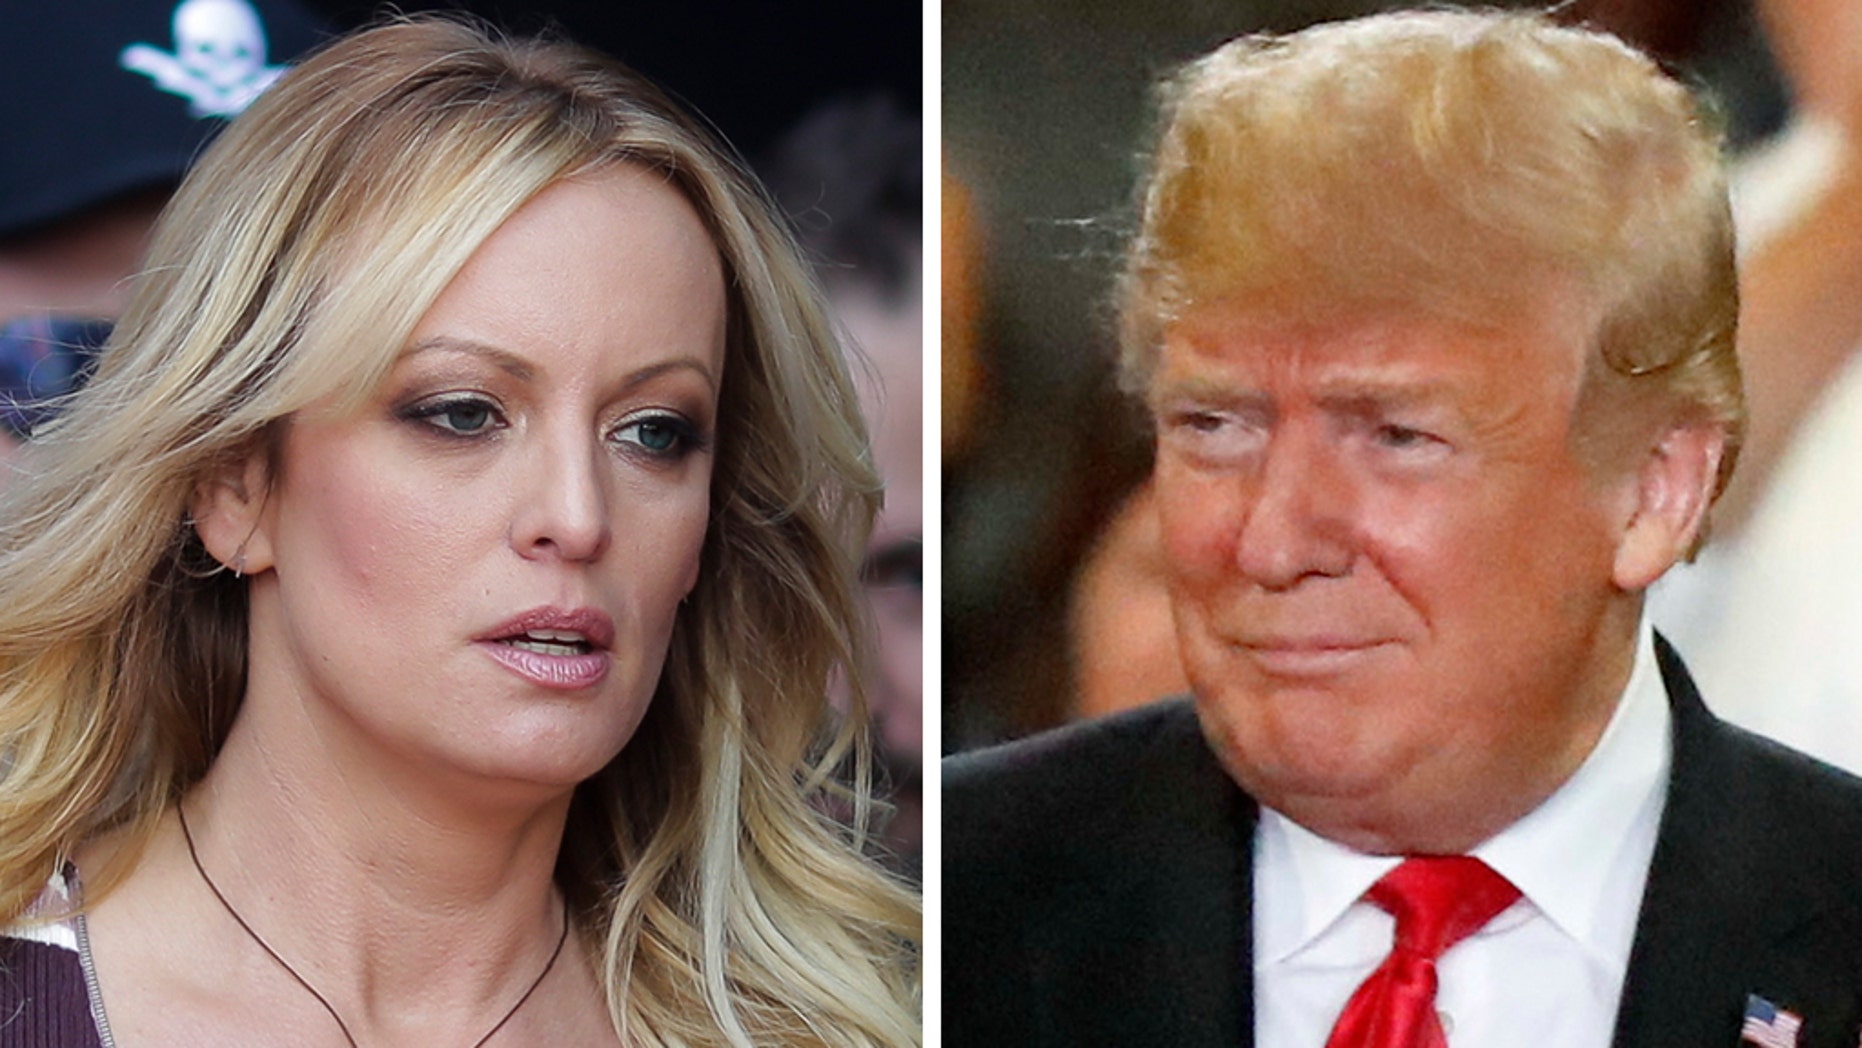 Judge Hints Stormy Daniels Lawsuit Against Trump Could Be Tossed Fox News 0378